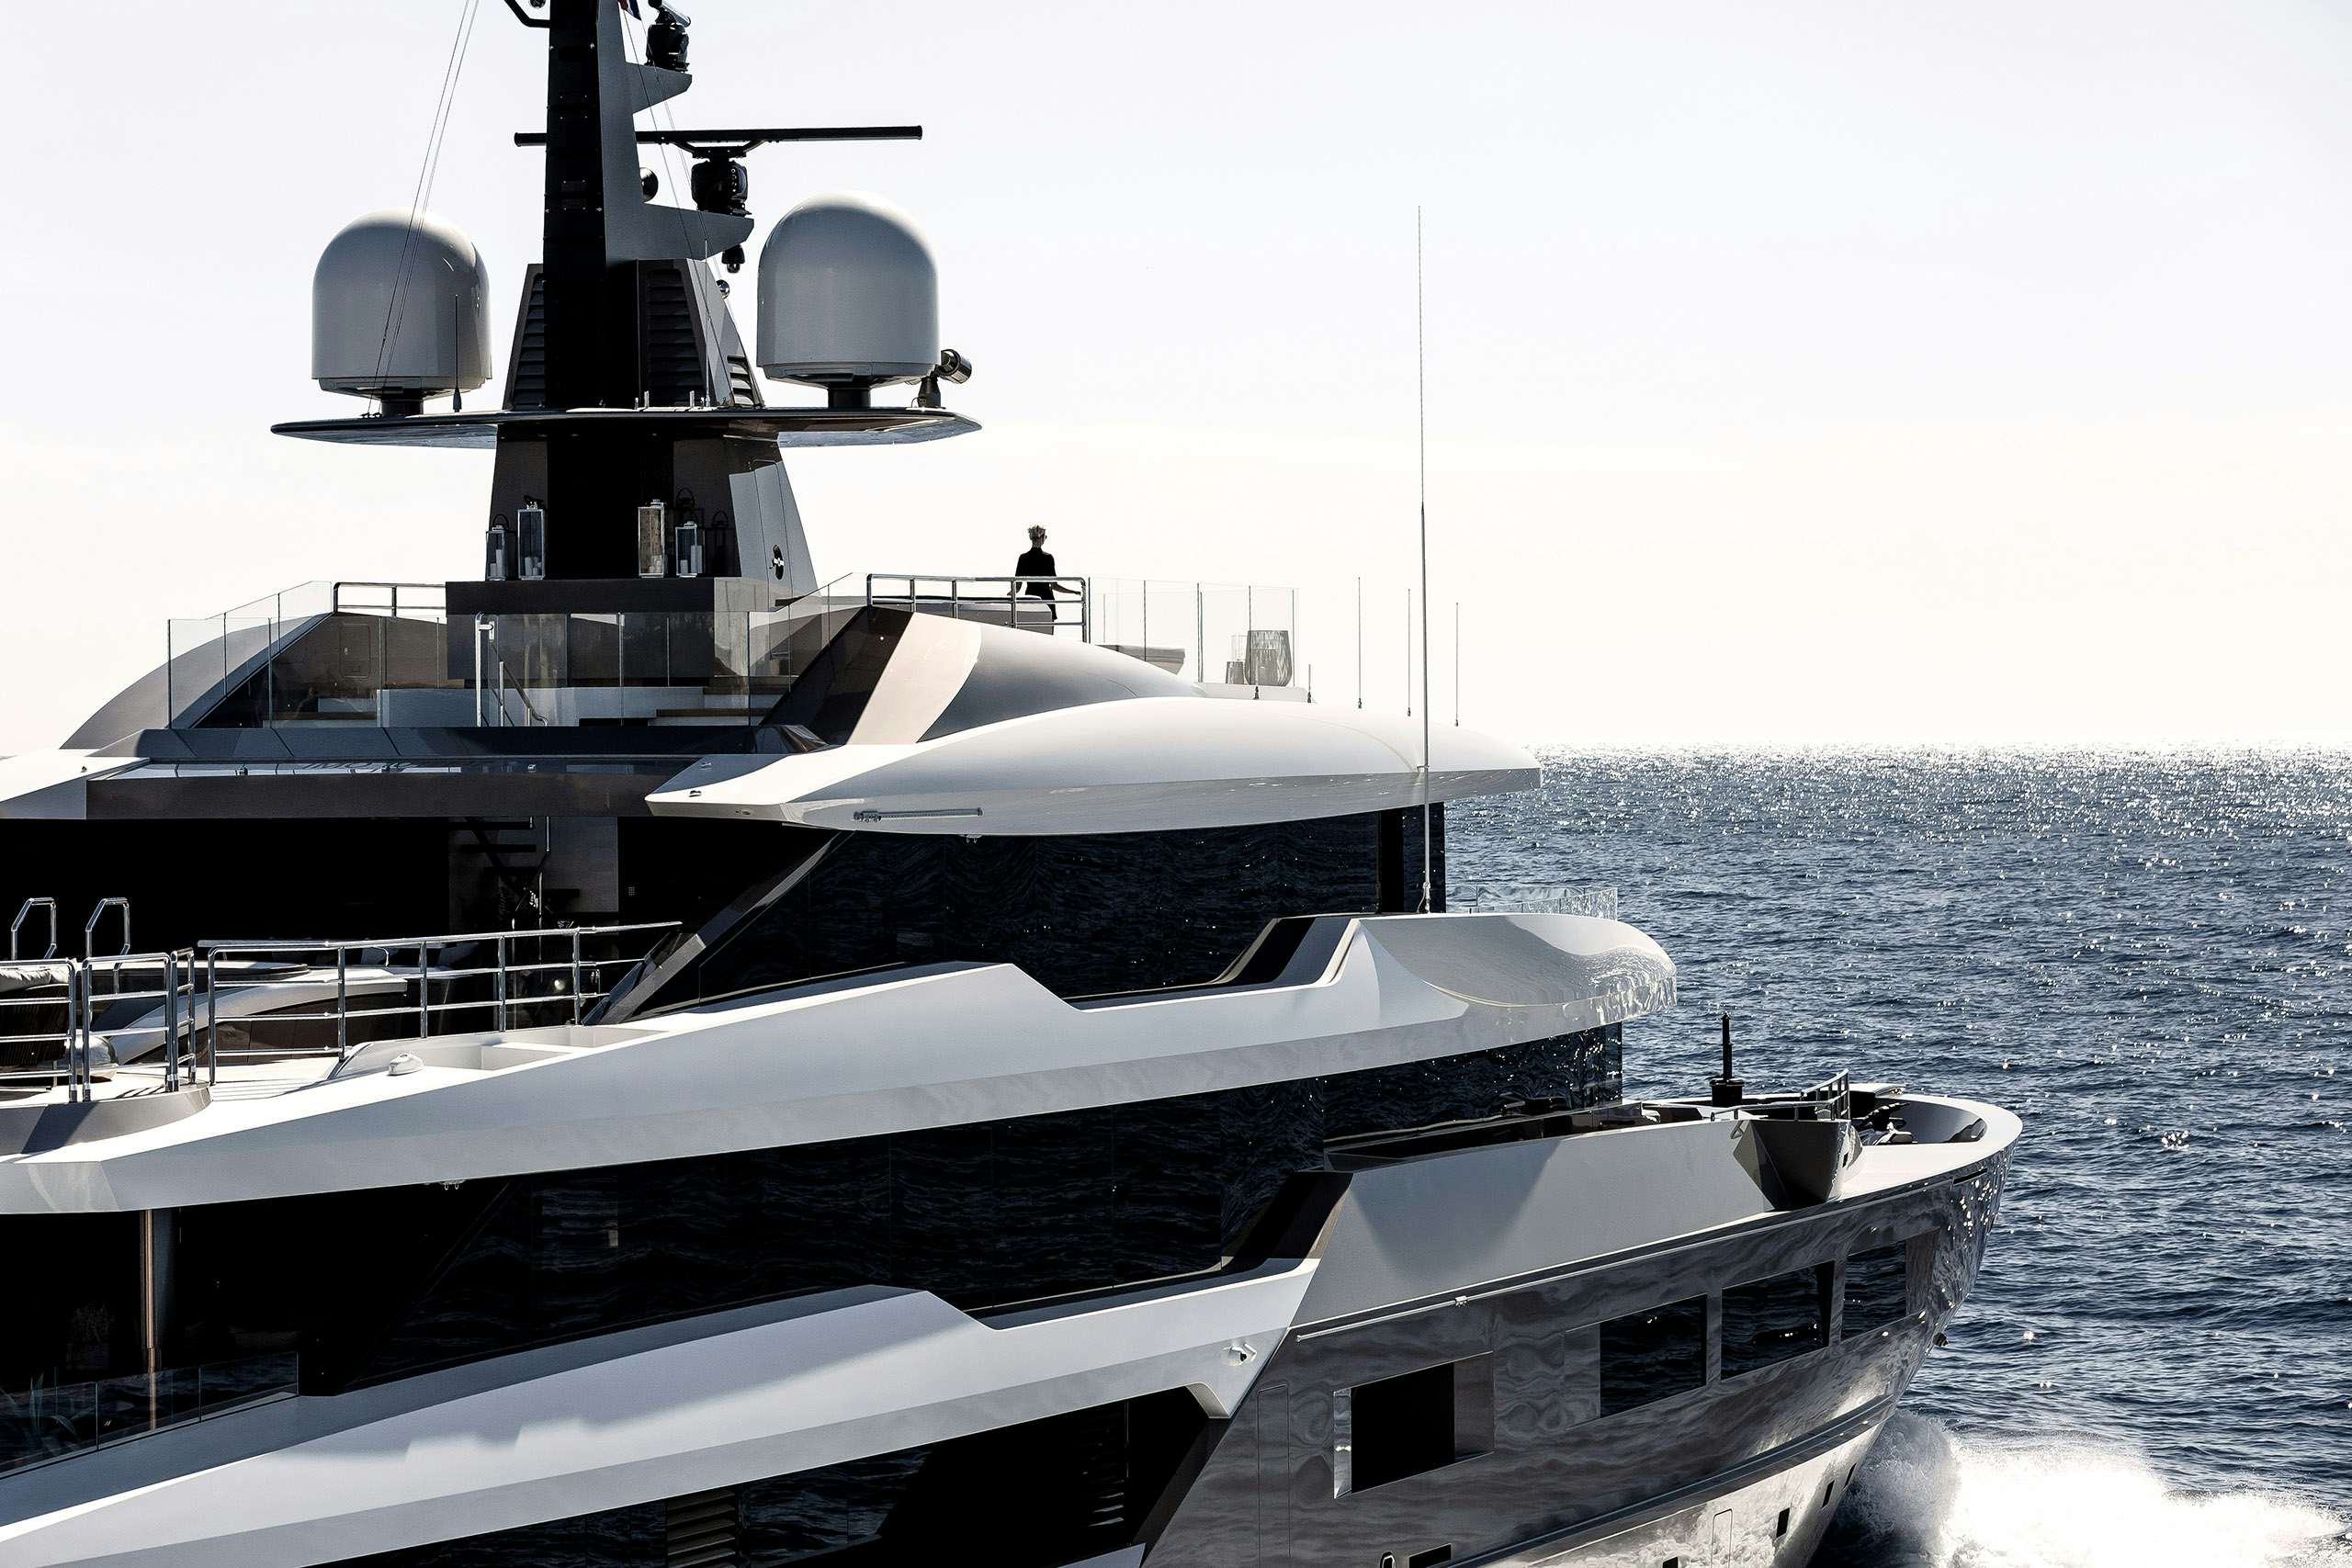 large yacht charters